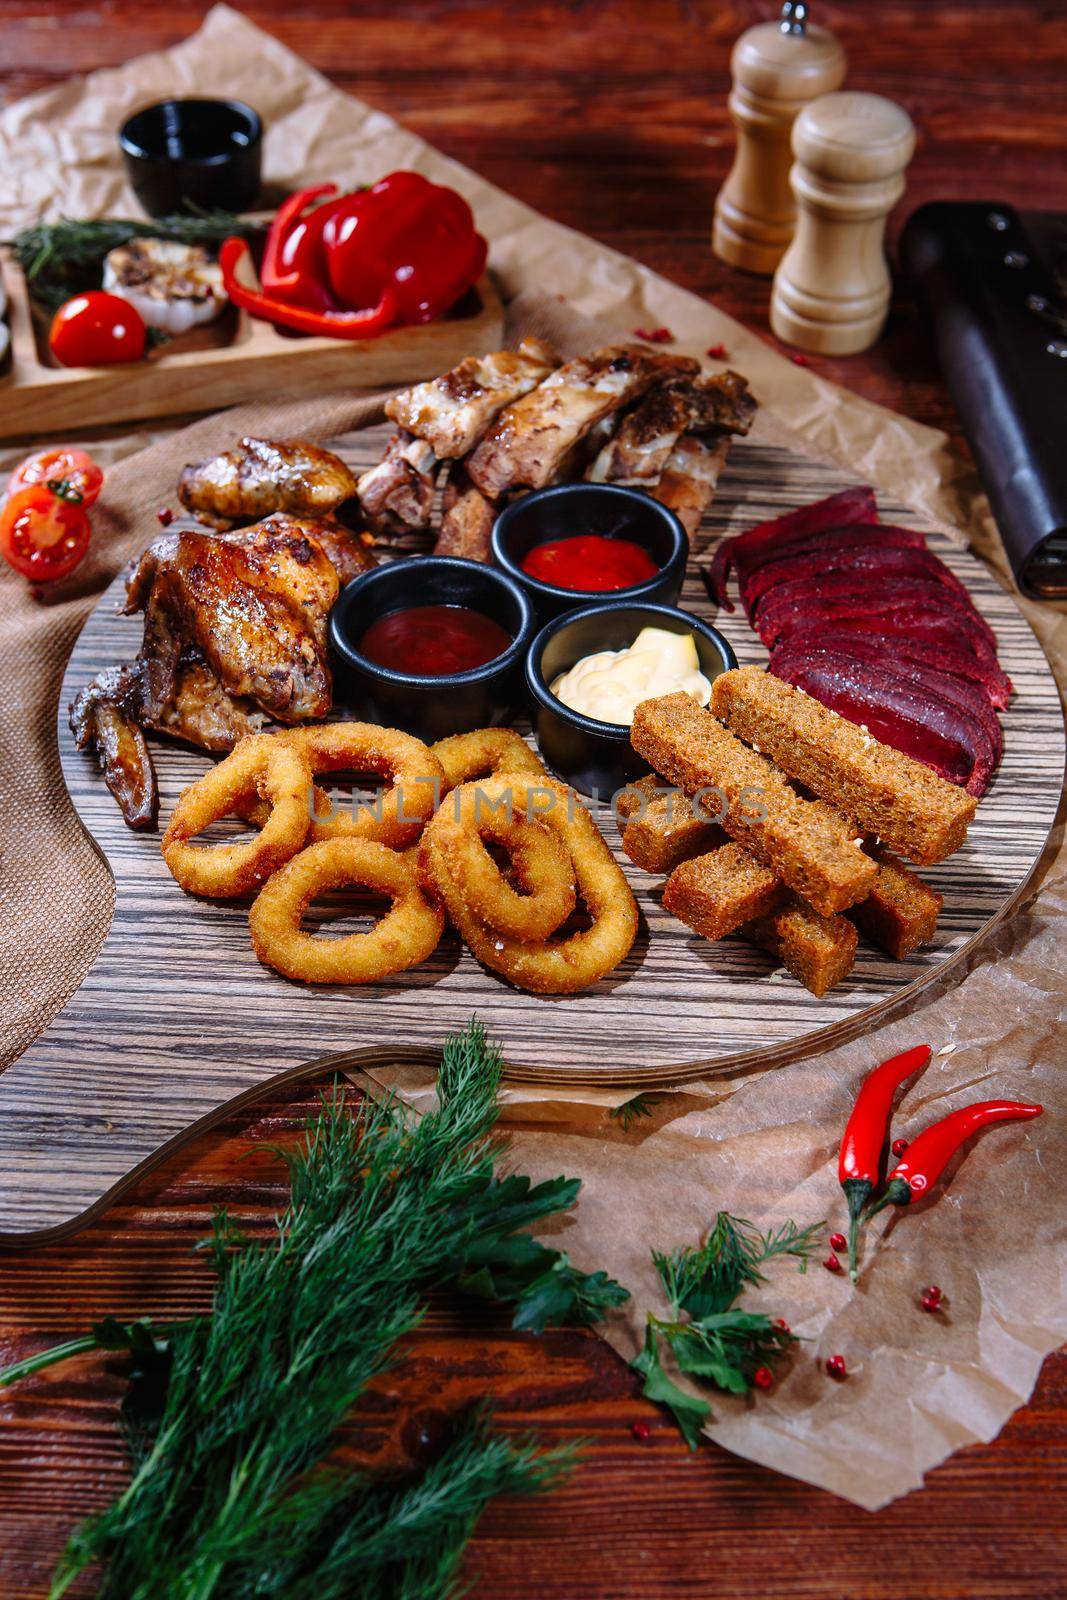 Food set for beer lovers, beer set, fried ribs, mix. by deandy